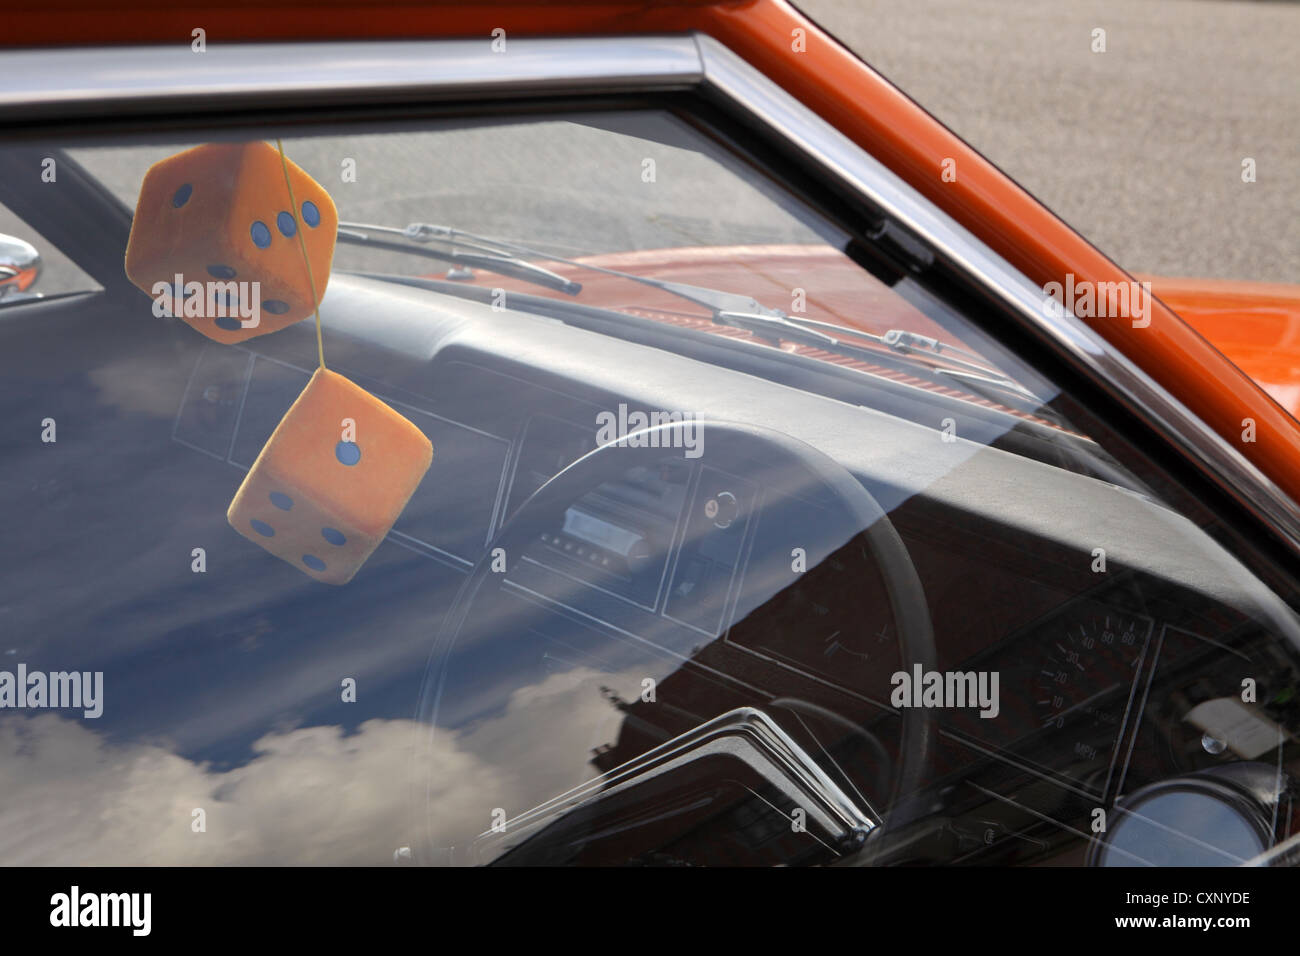 Pair large orange fuzzy furry dice hanging from rear view mirror, restored orange Ford Cortina Mark 3, Suffolk, UK Stock Photo